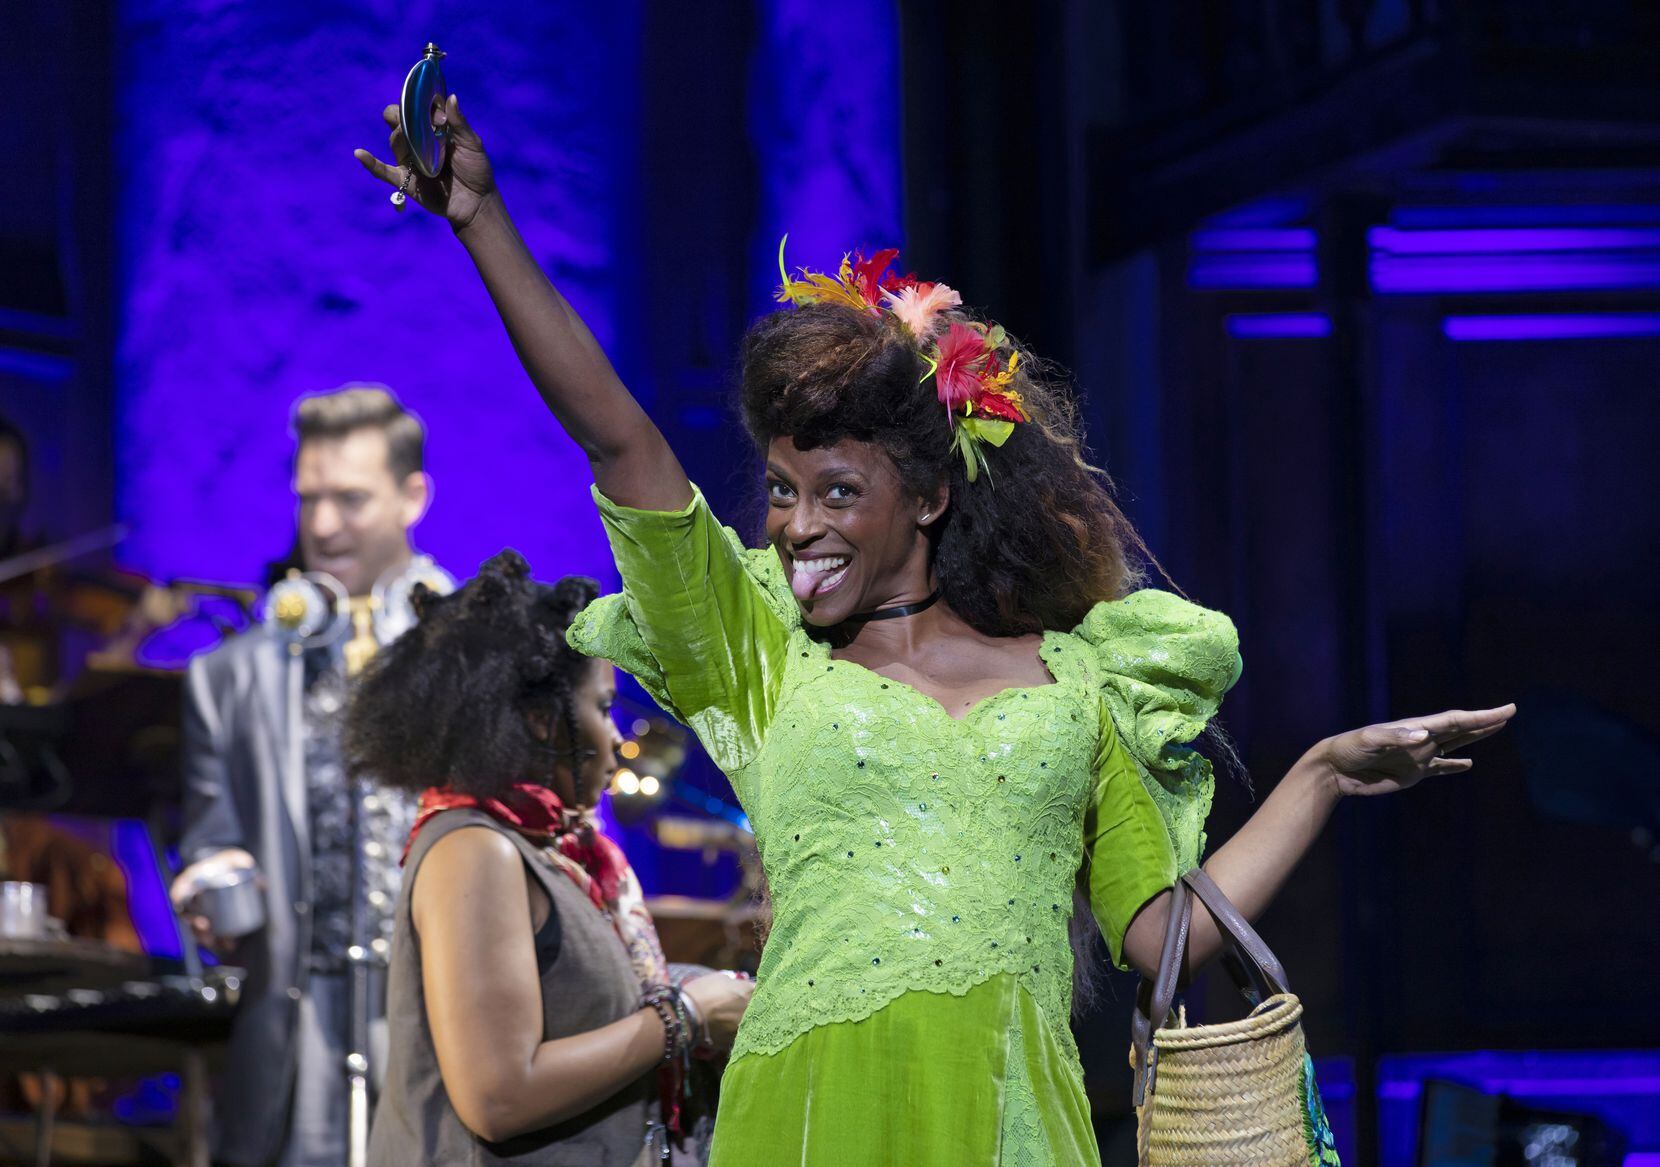 Kimberly Marable as Persephone in the North American tour of "Hadestown."